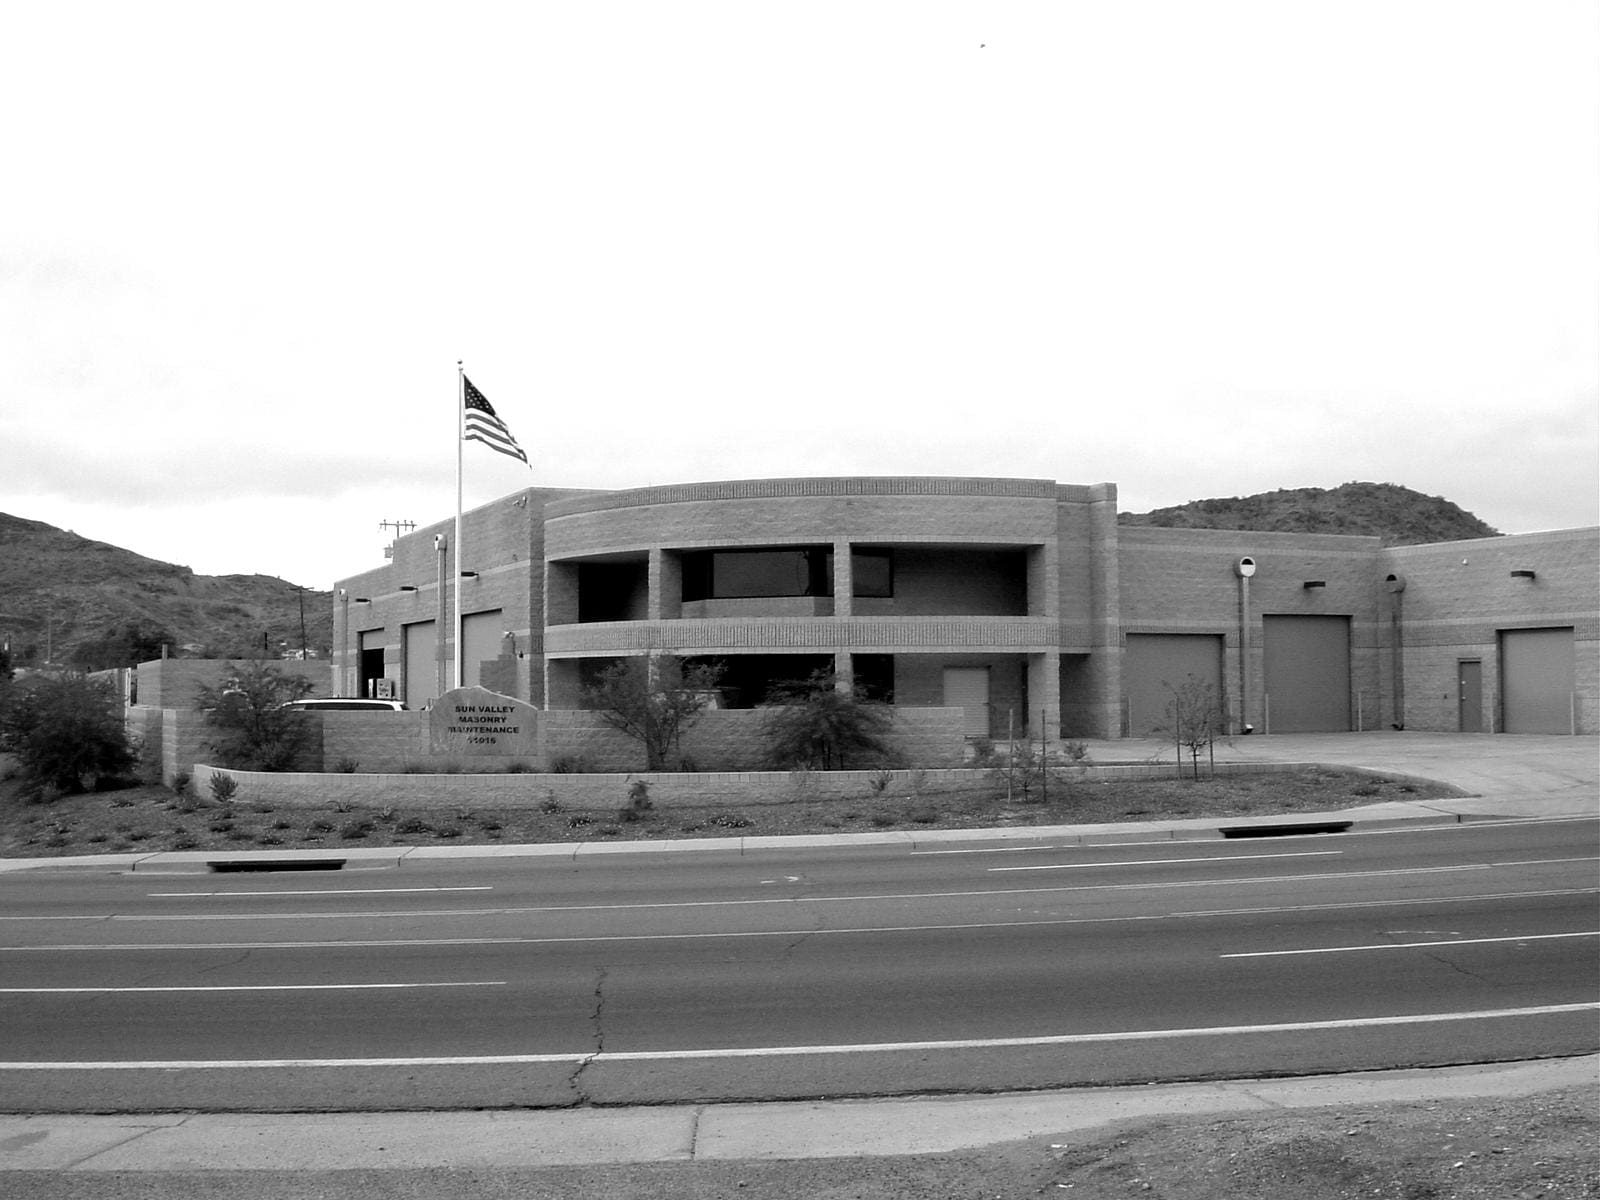 A grayscale image depicting a modern single-story building constructed by Sun Valley Construction, with a flagpole flying the American flag, situated next to a road with visible lane markings.